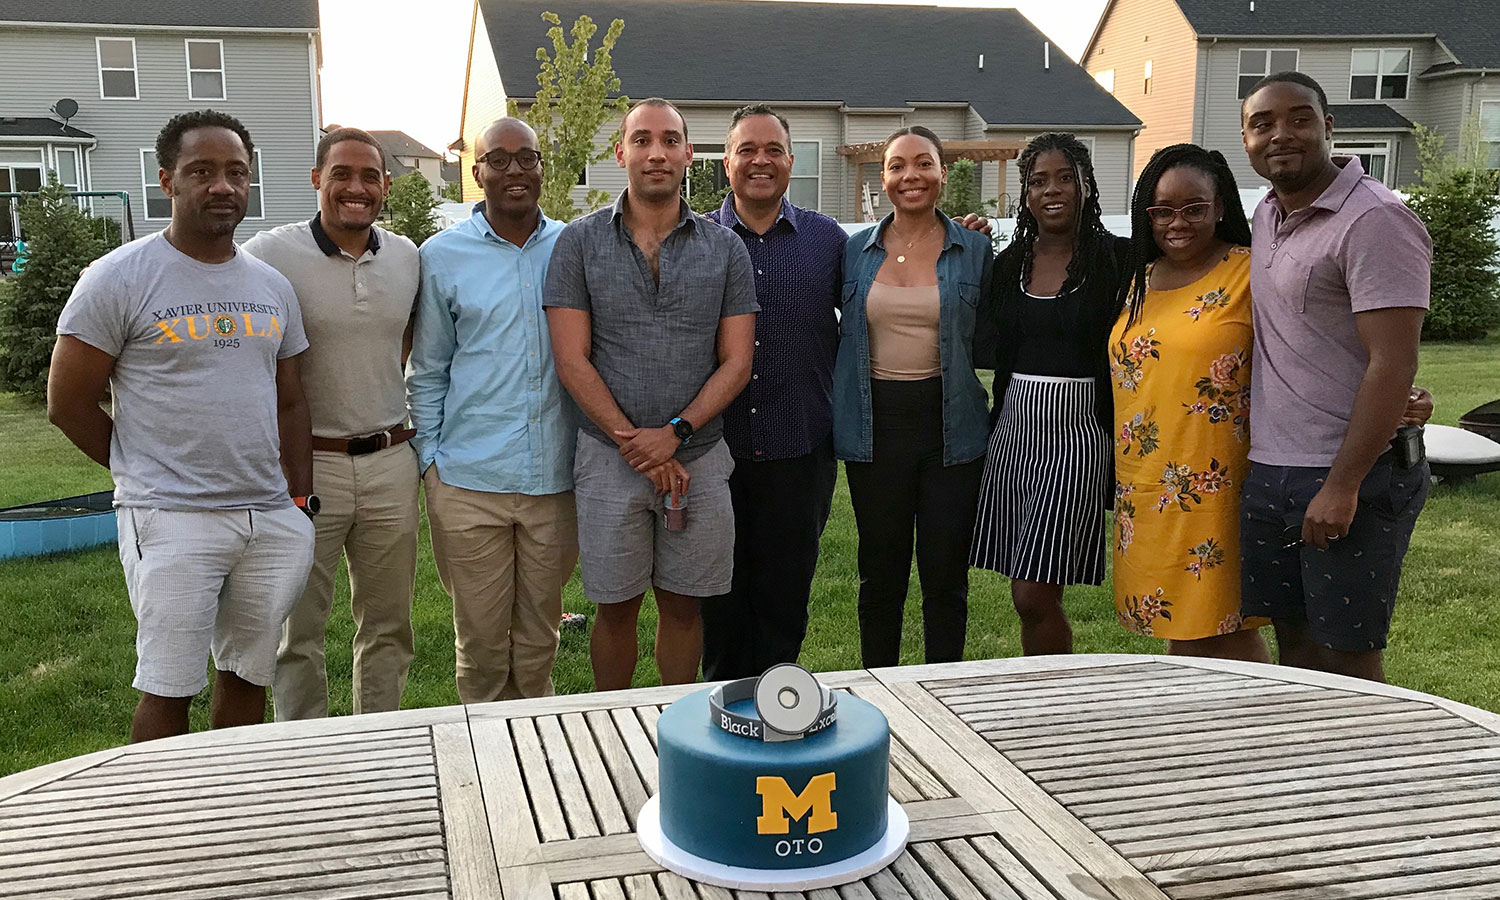 Drs. Lamont Jones, Connor Smith, Terrence Pleasant, Michael Sylvester, David Brown, Mariel Watkins, Fejiro Okifo, and Shannon Fayson (left to right)